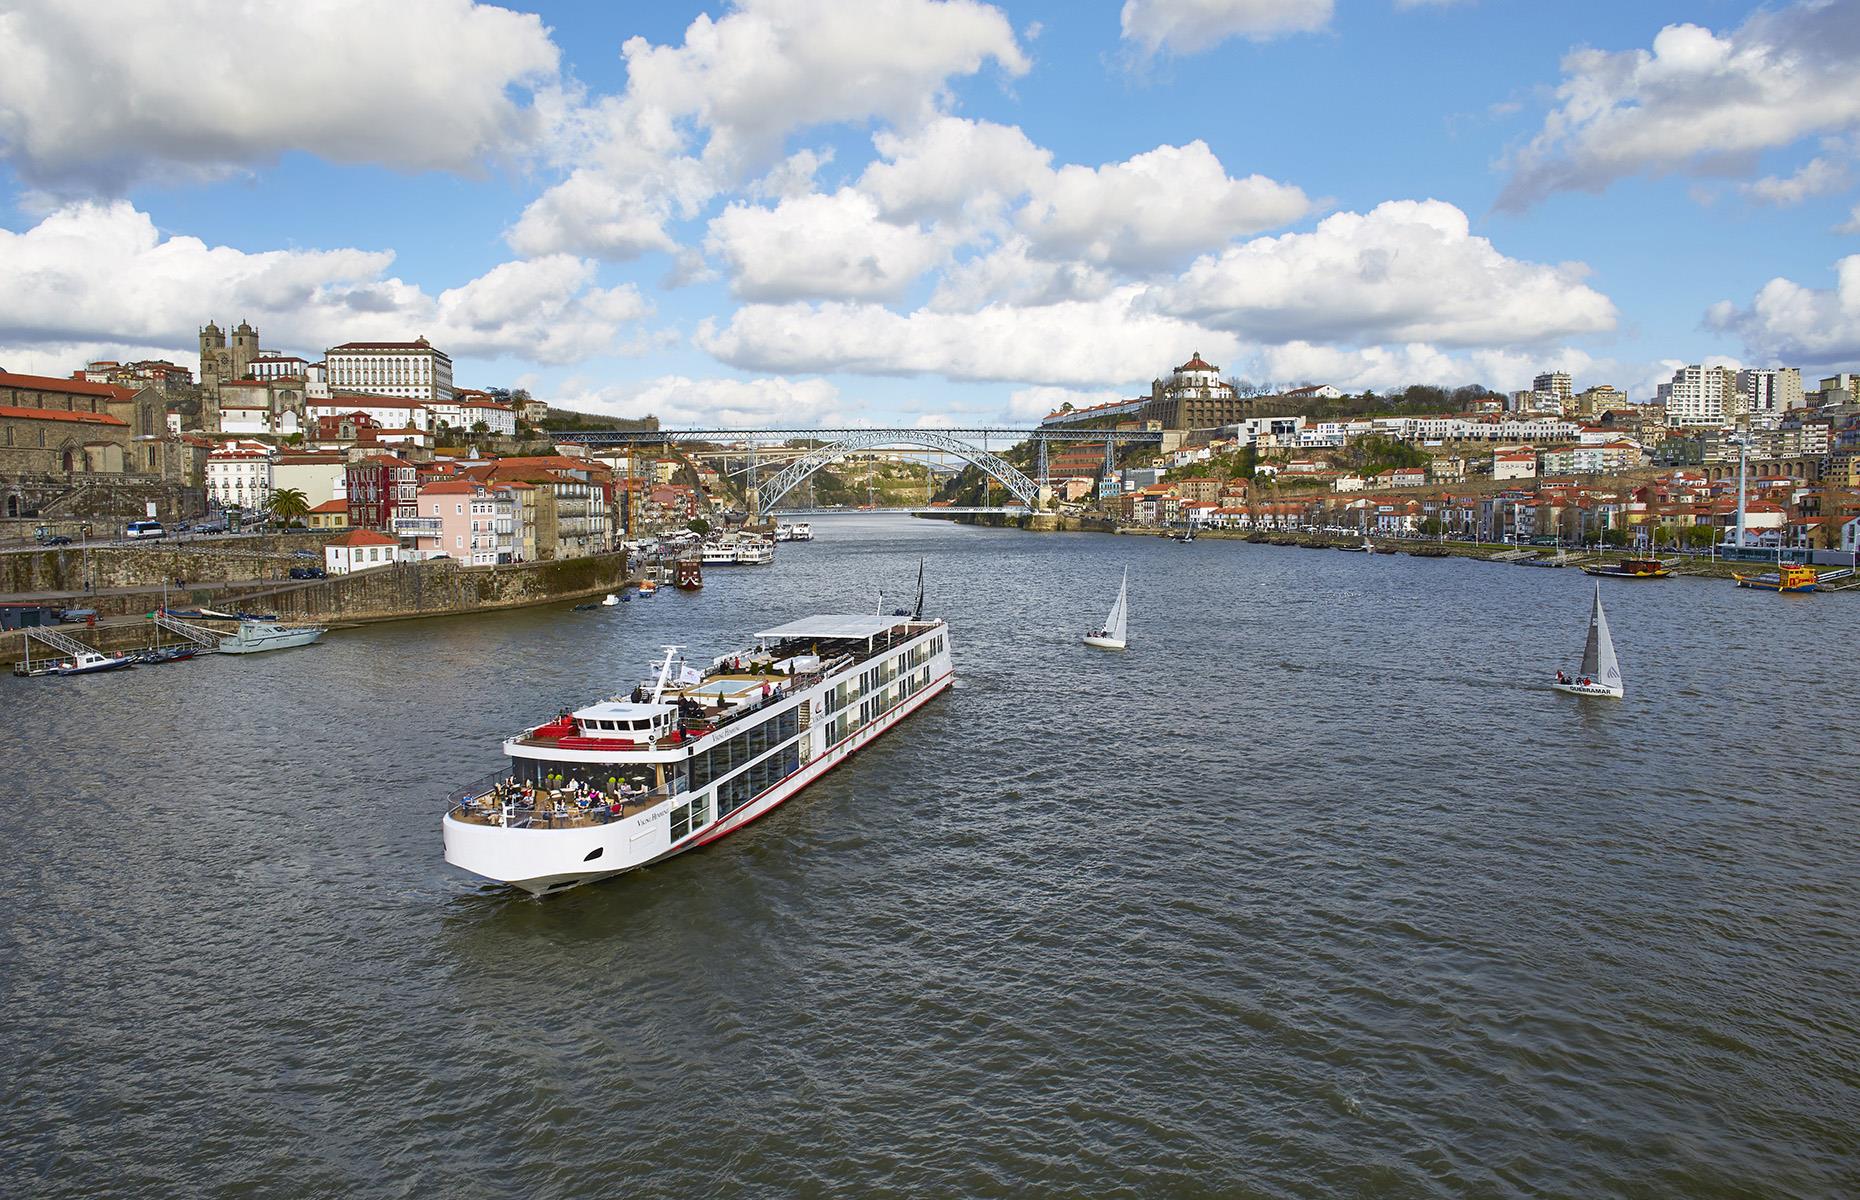 <p>If you’re a fan of cruising, what could be better than pairing a river cruise with an ocean one? For example, combine a sail along the Douro, which cuts across Spain and Portugal and finishes at the Atlantic coast, with an ocean-going cruise sailing out of Porto. Doing so is easy, especially if you sail with a line like <a href="https://www.vikingrivercruises.co.uk/?CreativeID=7a5f352e-f1e8-4546-91a4-c6b6ac2409c7_1&TagID=VC01_0112629_CK&utm_campaign=Brand+Defence&utm_medium=Search+Advertising&utm_term=null&utm_source=Google&gclid=CjwKCAiAoL6eBhA3EiwAXDom5twrhOZmvQs3yyVwYQQKNHOz7A6VOG0xSIMlV0Rgv1qDOEJQekESYhoCs3QQAvD_BwE">Viking Cruises</a>, which has a fleet including both ocean and river boats.</p>